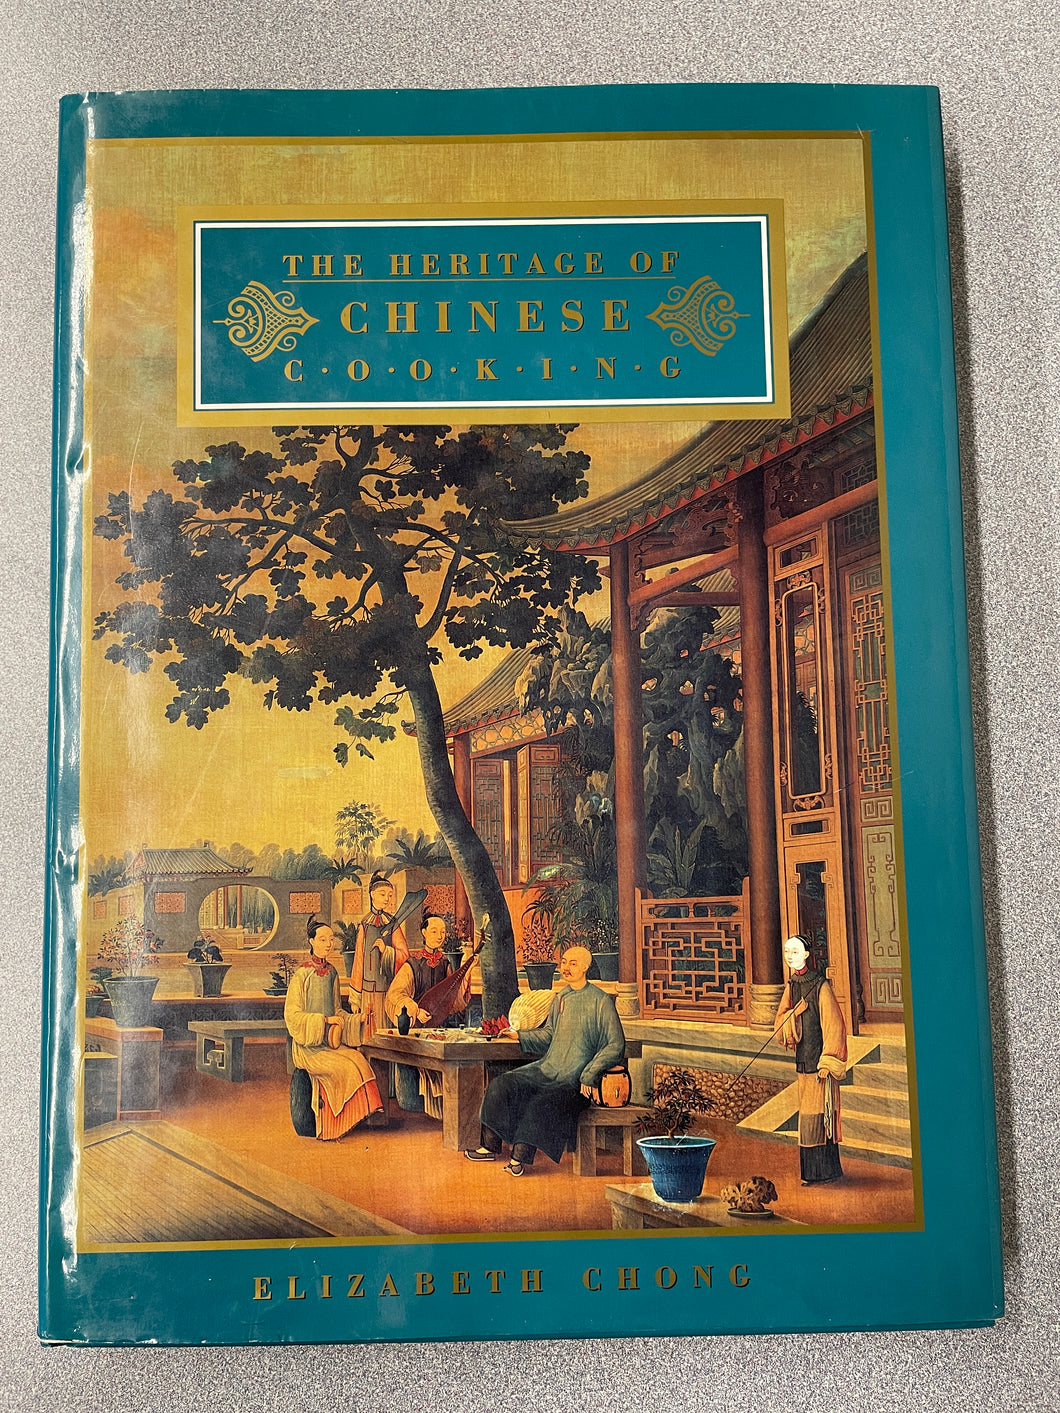 The Heritage of Chinese Cooking, Chong, Elizabeth [1993] CO 1/24